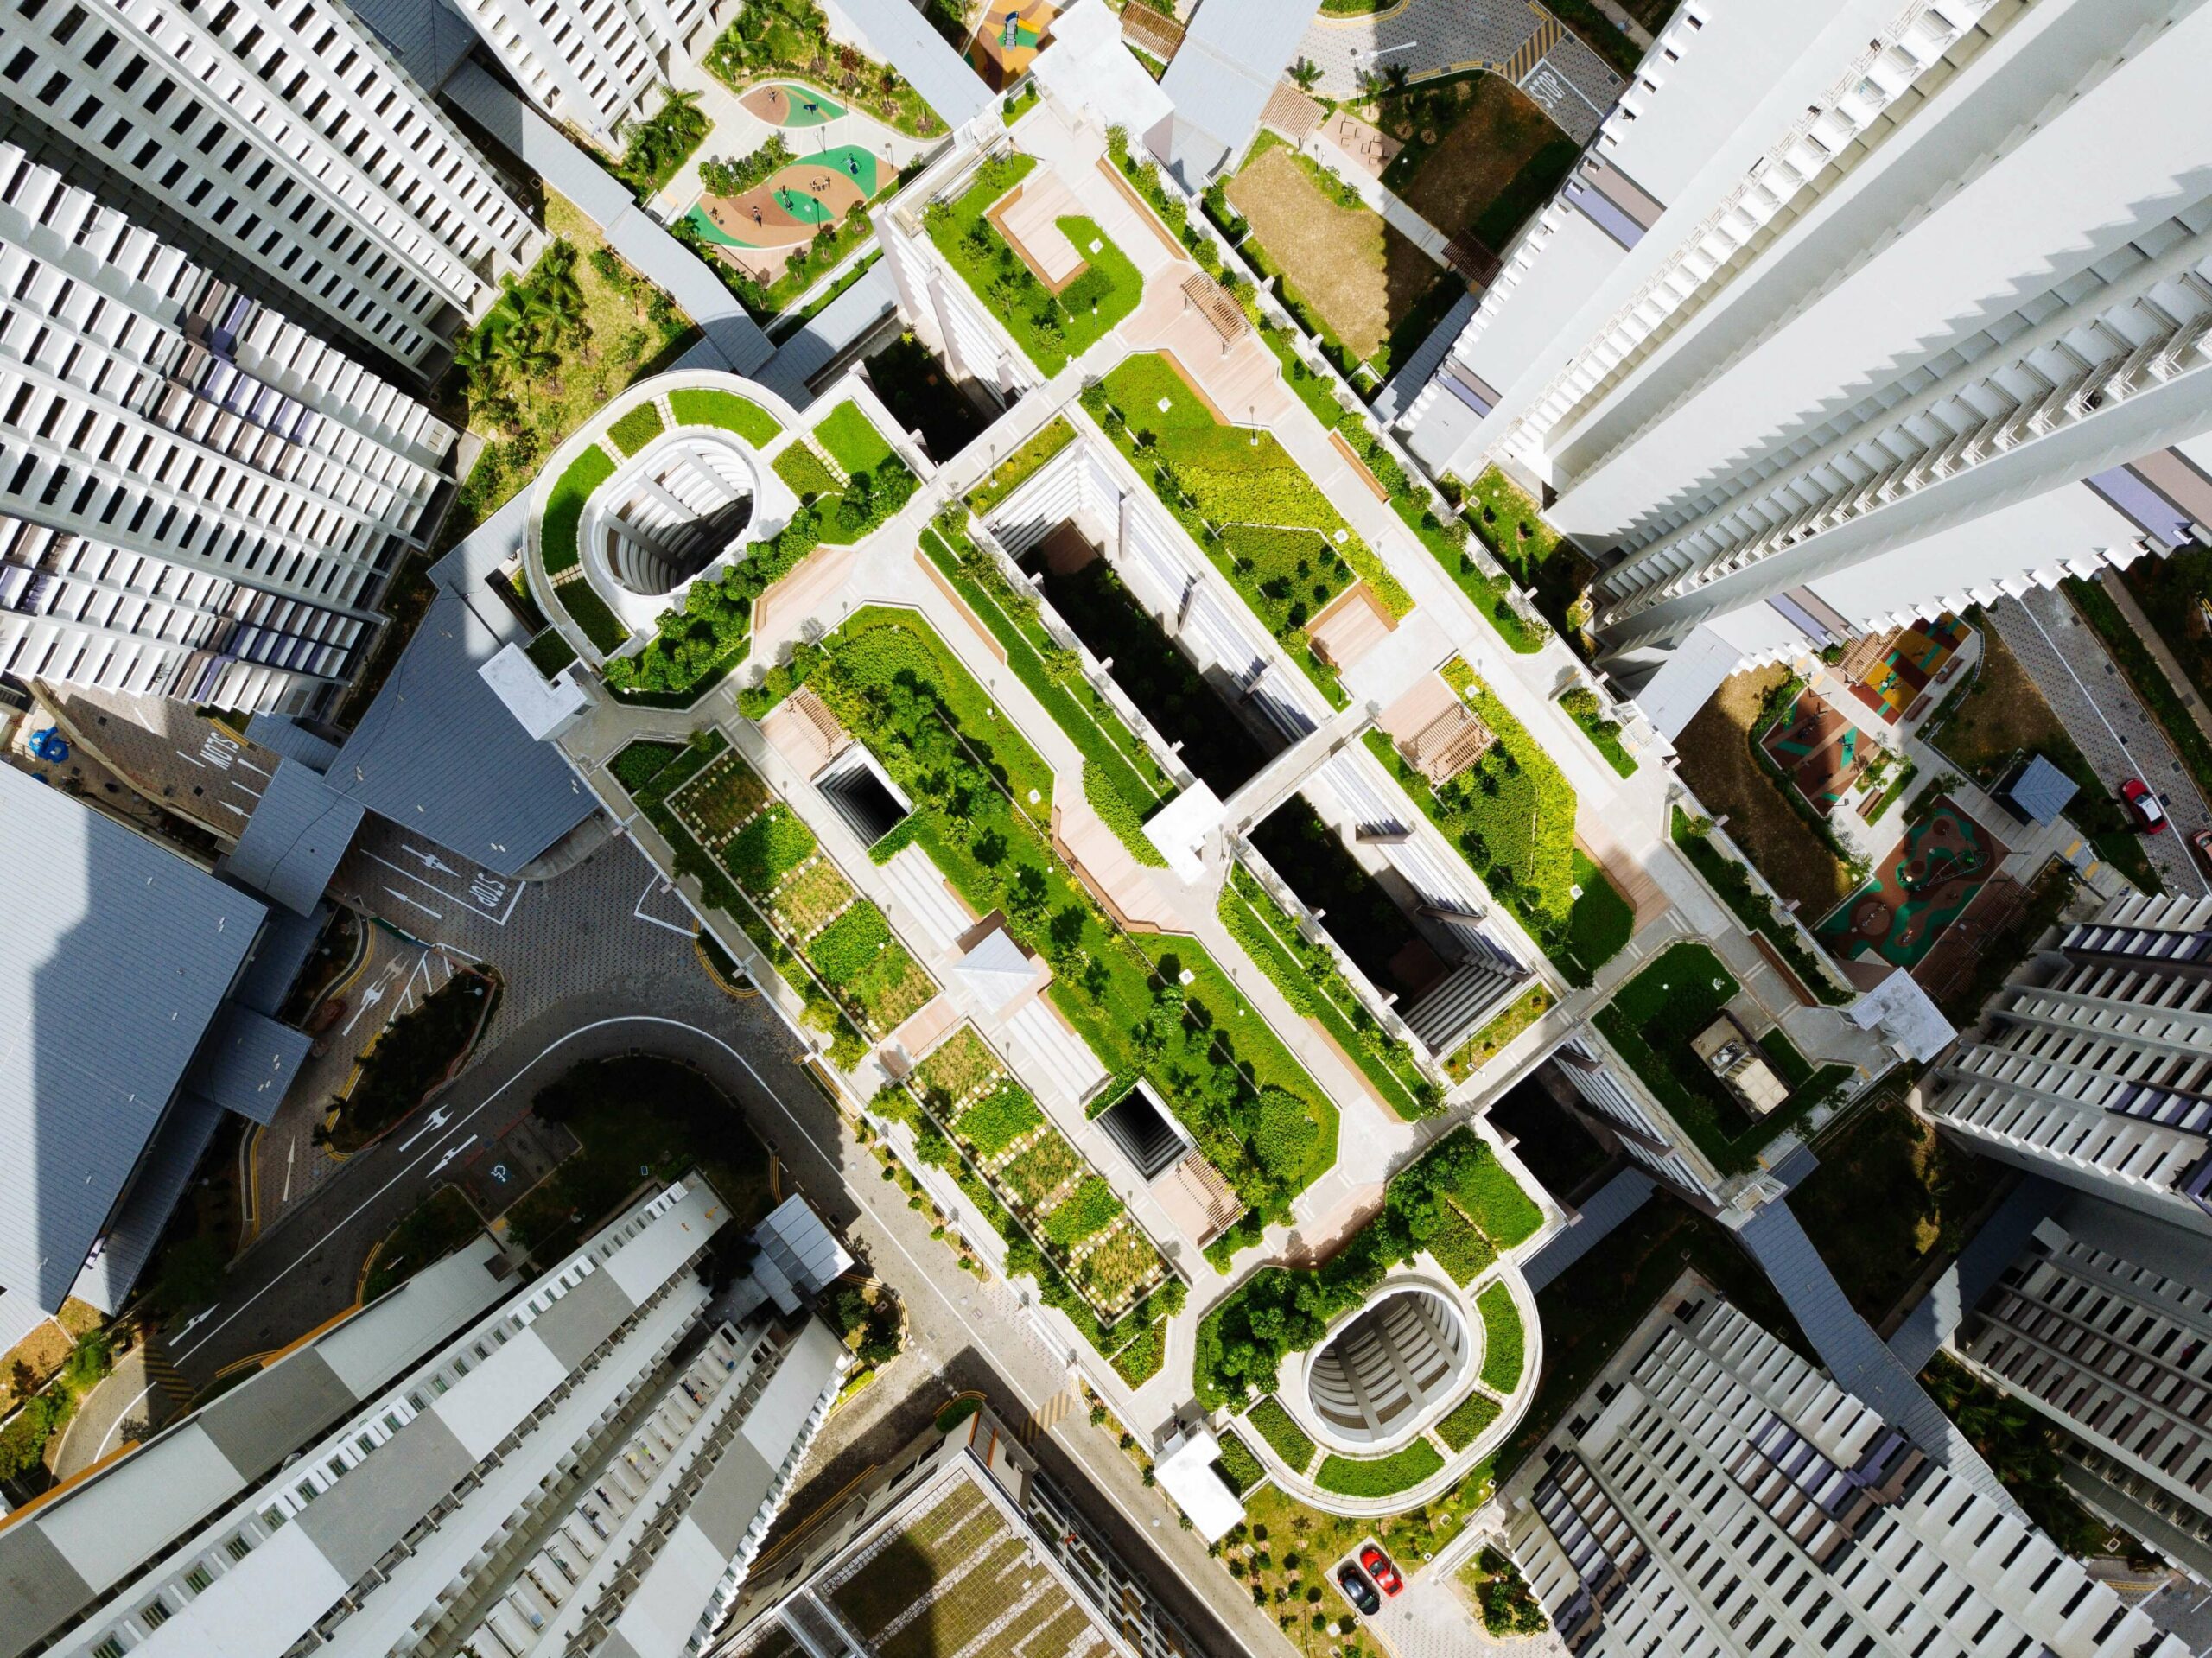 Green roof design in urban space